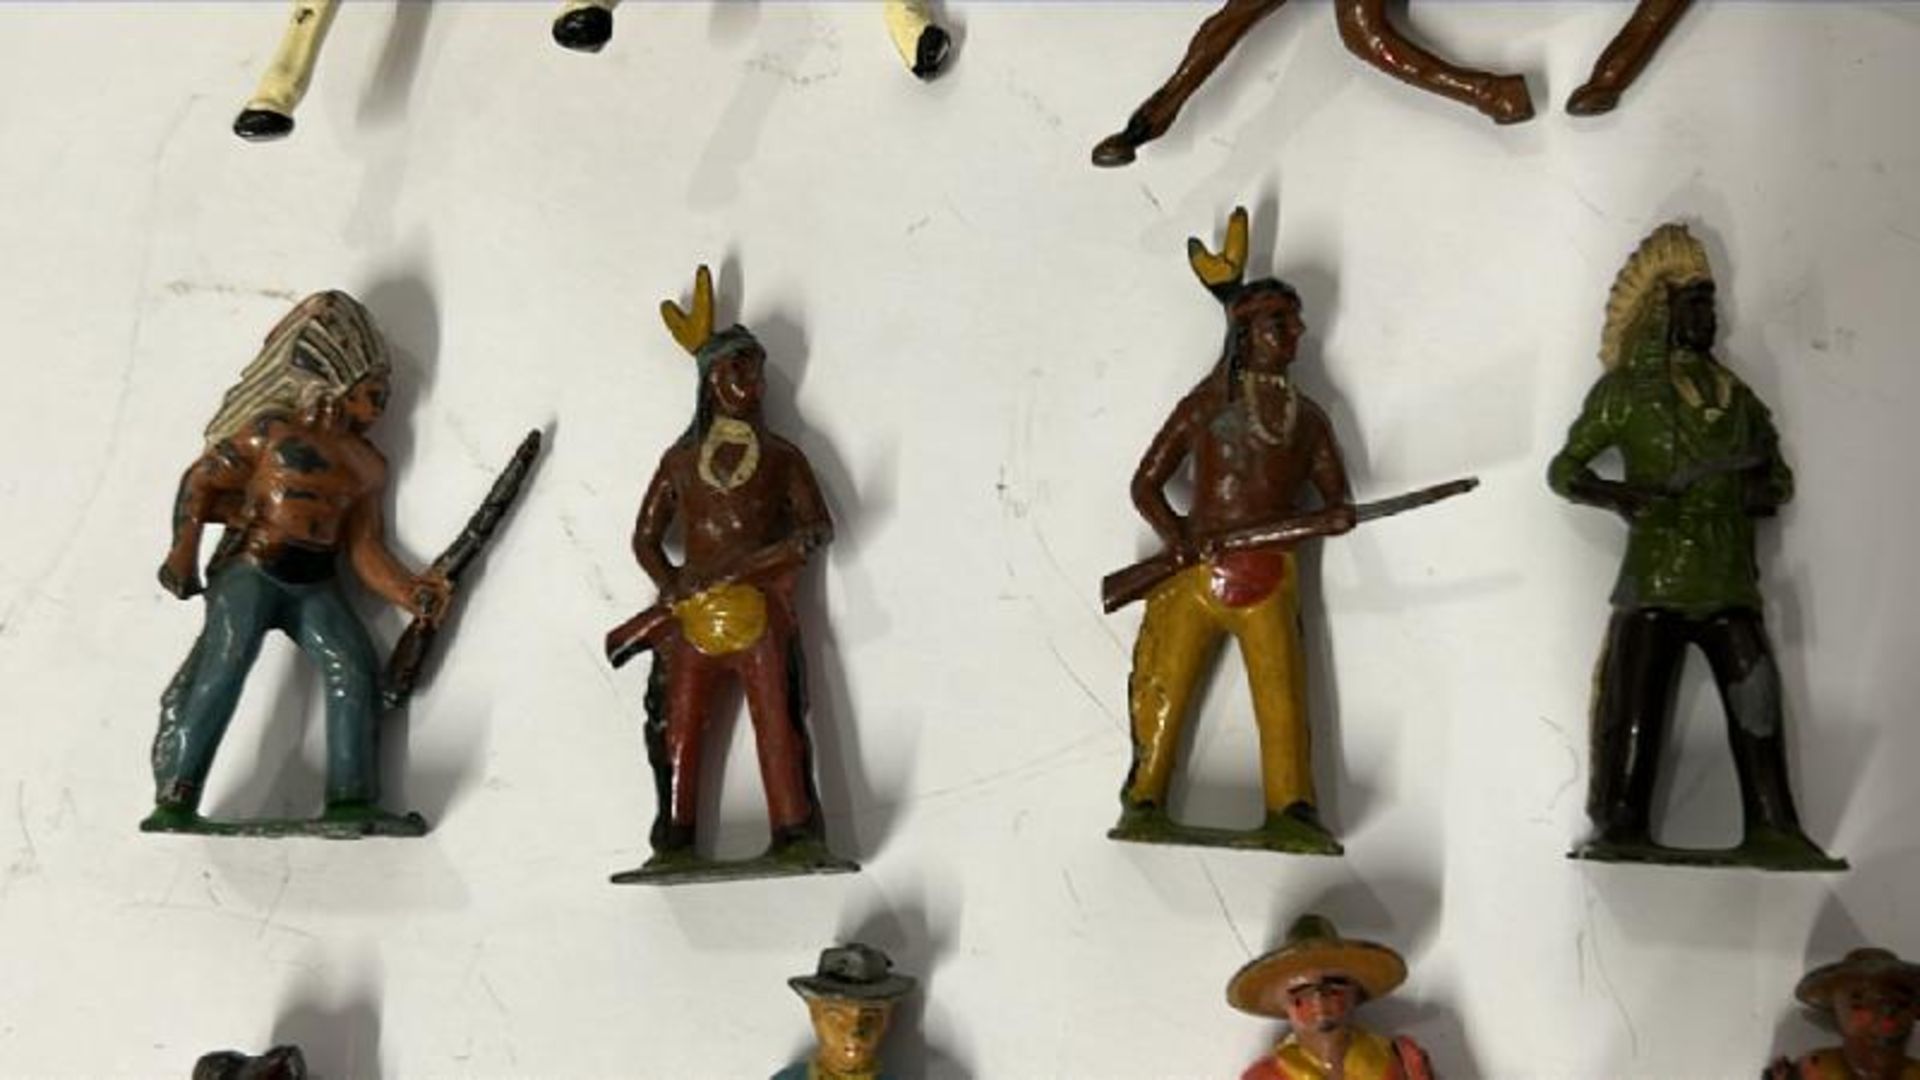 Mainly Britains lead 'Wild West' figures including horses, Cowboys and Native American warriors (29) - Image 8 of 11